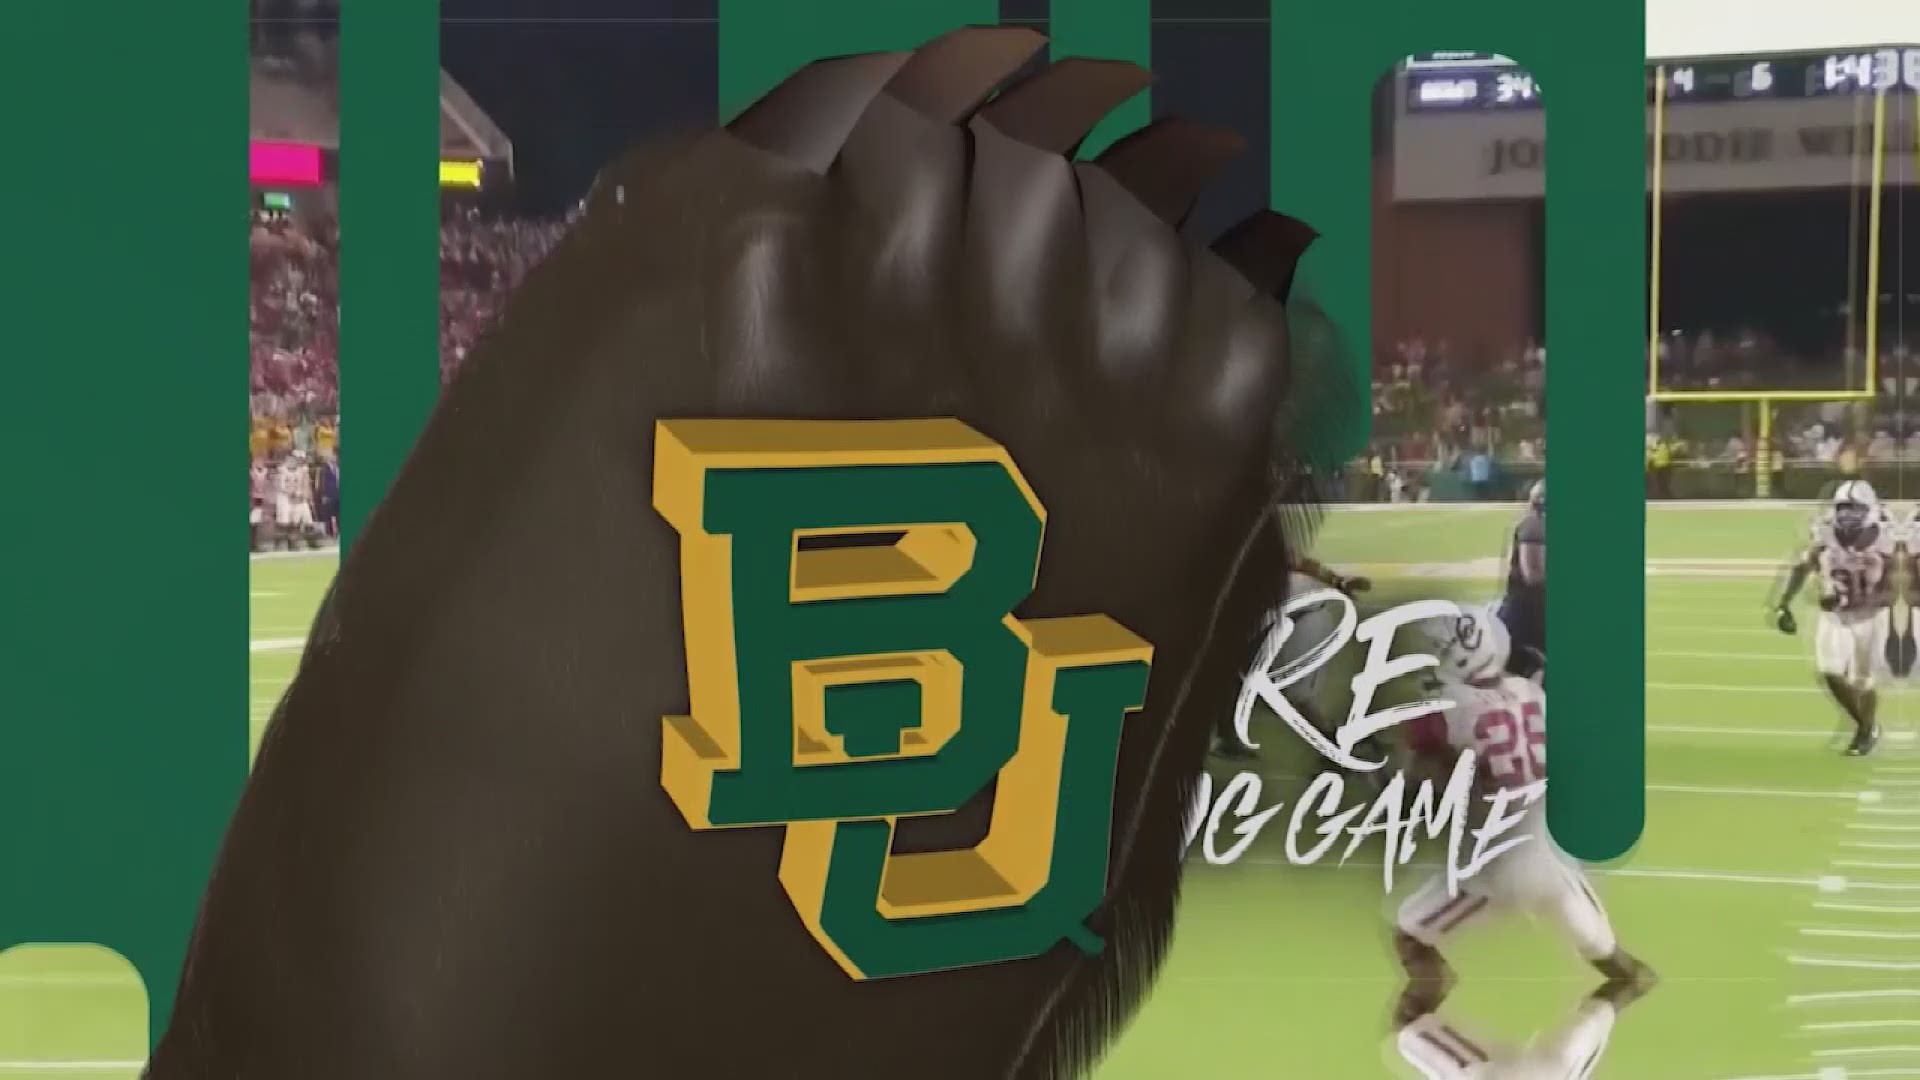 Baylor's annual homecoming parade will kick off at 9 a.m. on Oct. 12, and 6 News will be streaming live for anyone who can't make it to the celebration.